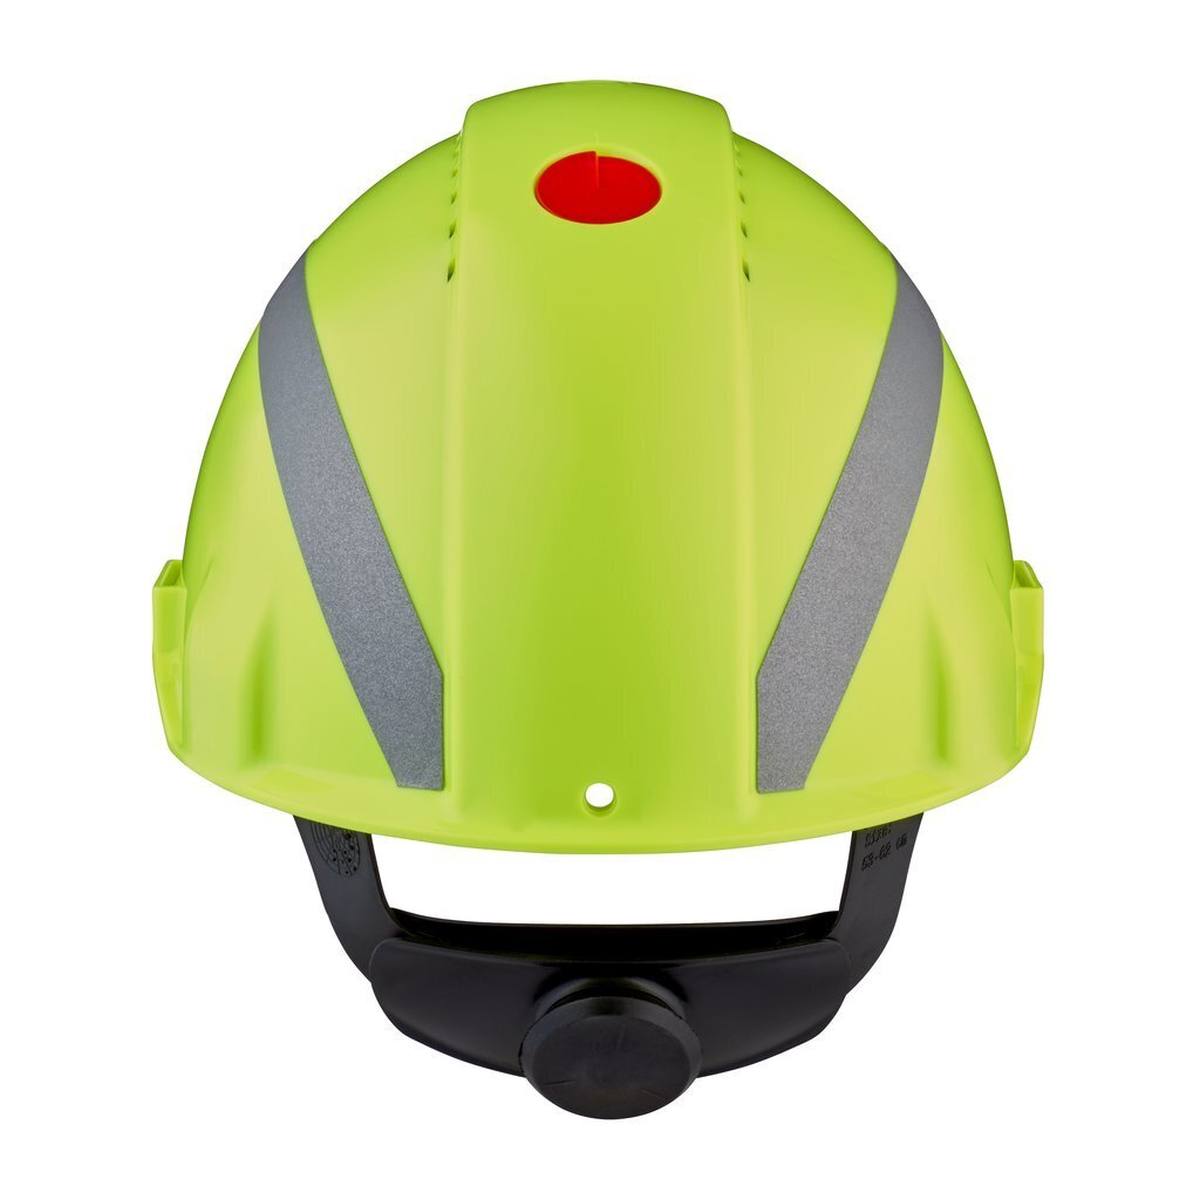 3M G3000 safety helmet with UV indicator, neon green, ABS, ventilated ratchet fastener, plastic sweatband, reflective sticker